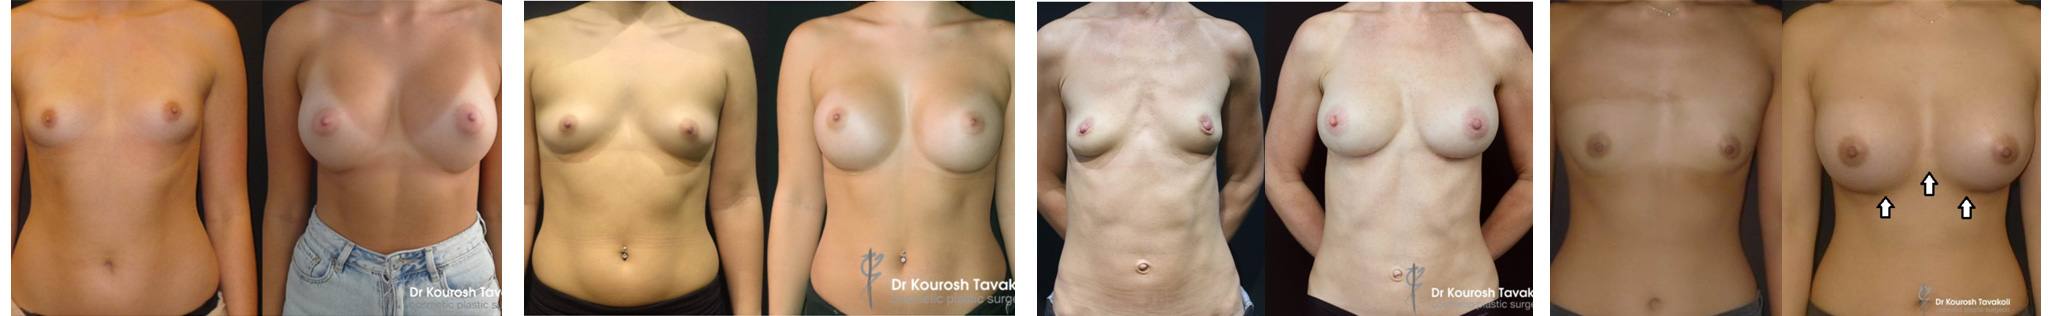 Fat graft with implants breast reshaping before and after gallery